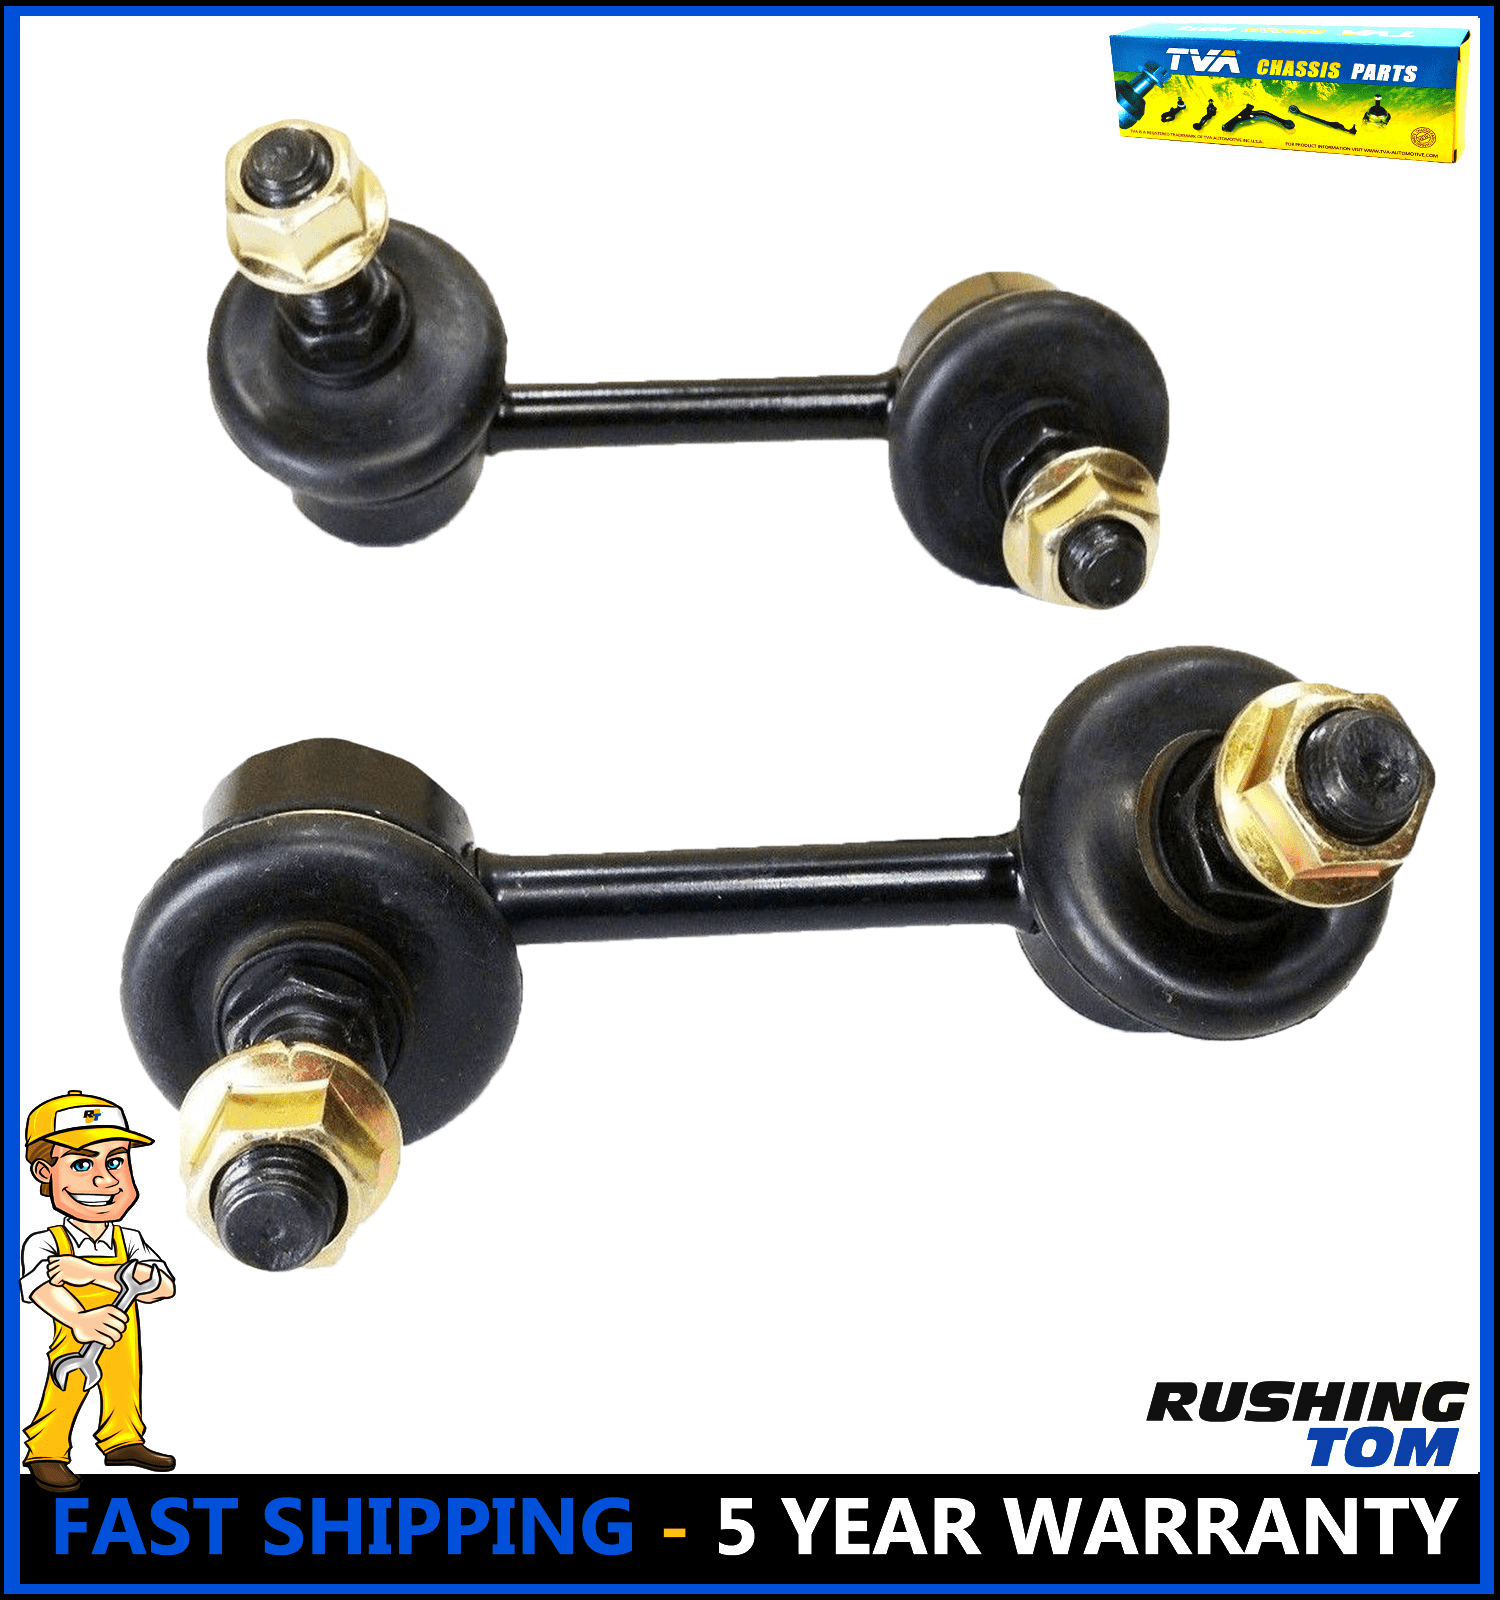 1A  Control Arms Tie Rod Ends Sway Bar Ends Front Kit Set for Nissan Maxima I30